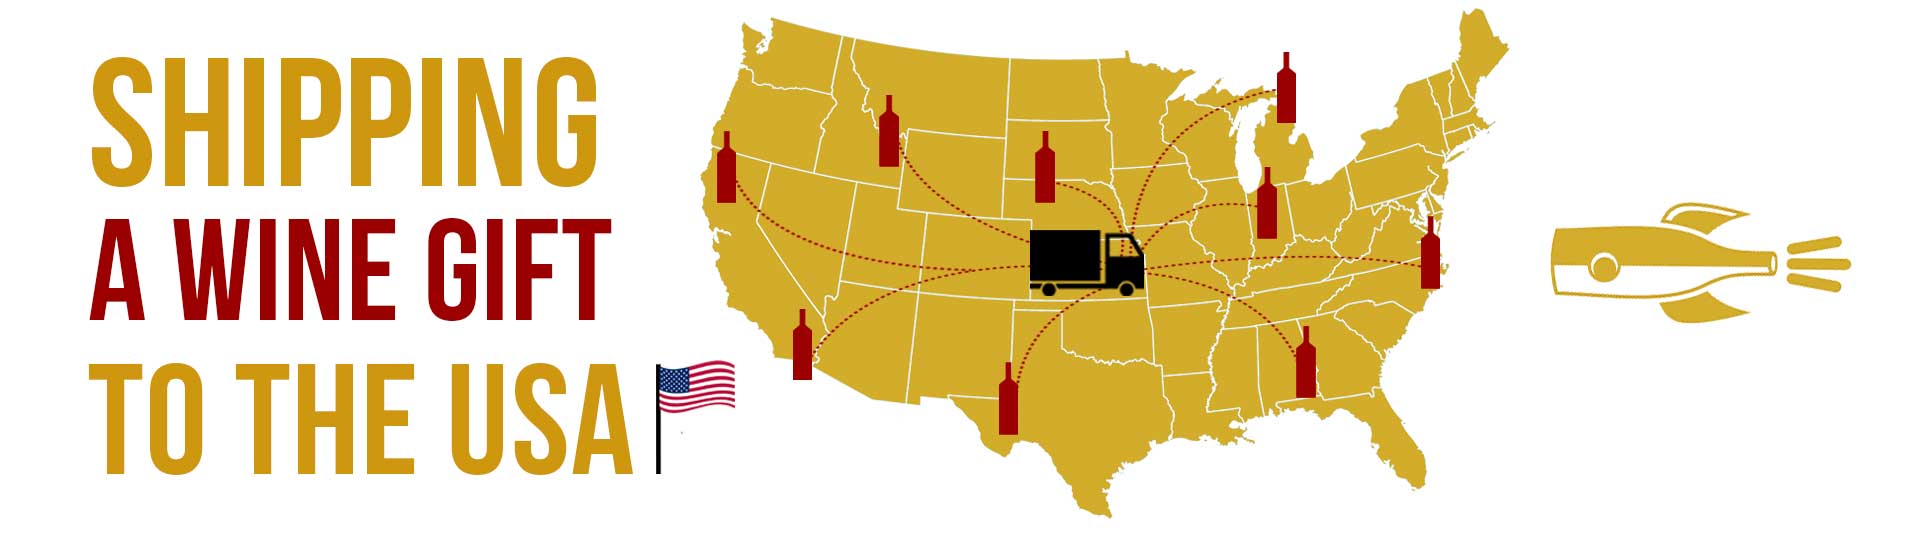 Shipping your wine gift to the USA